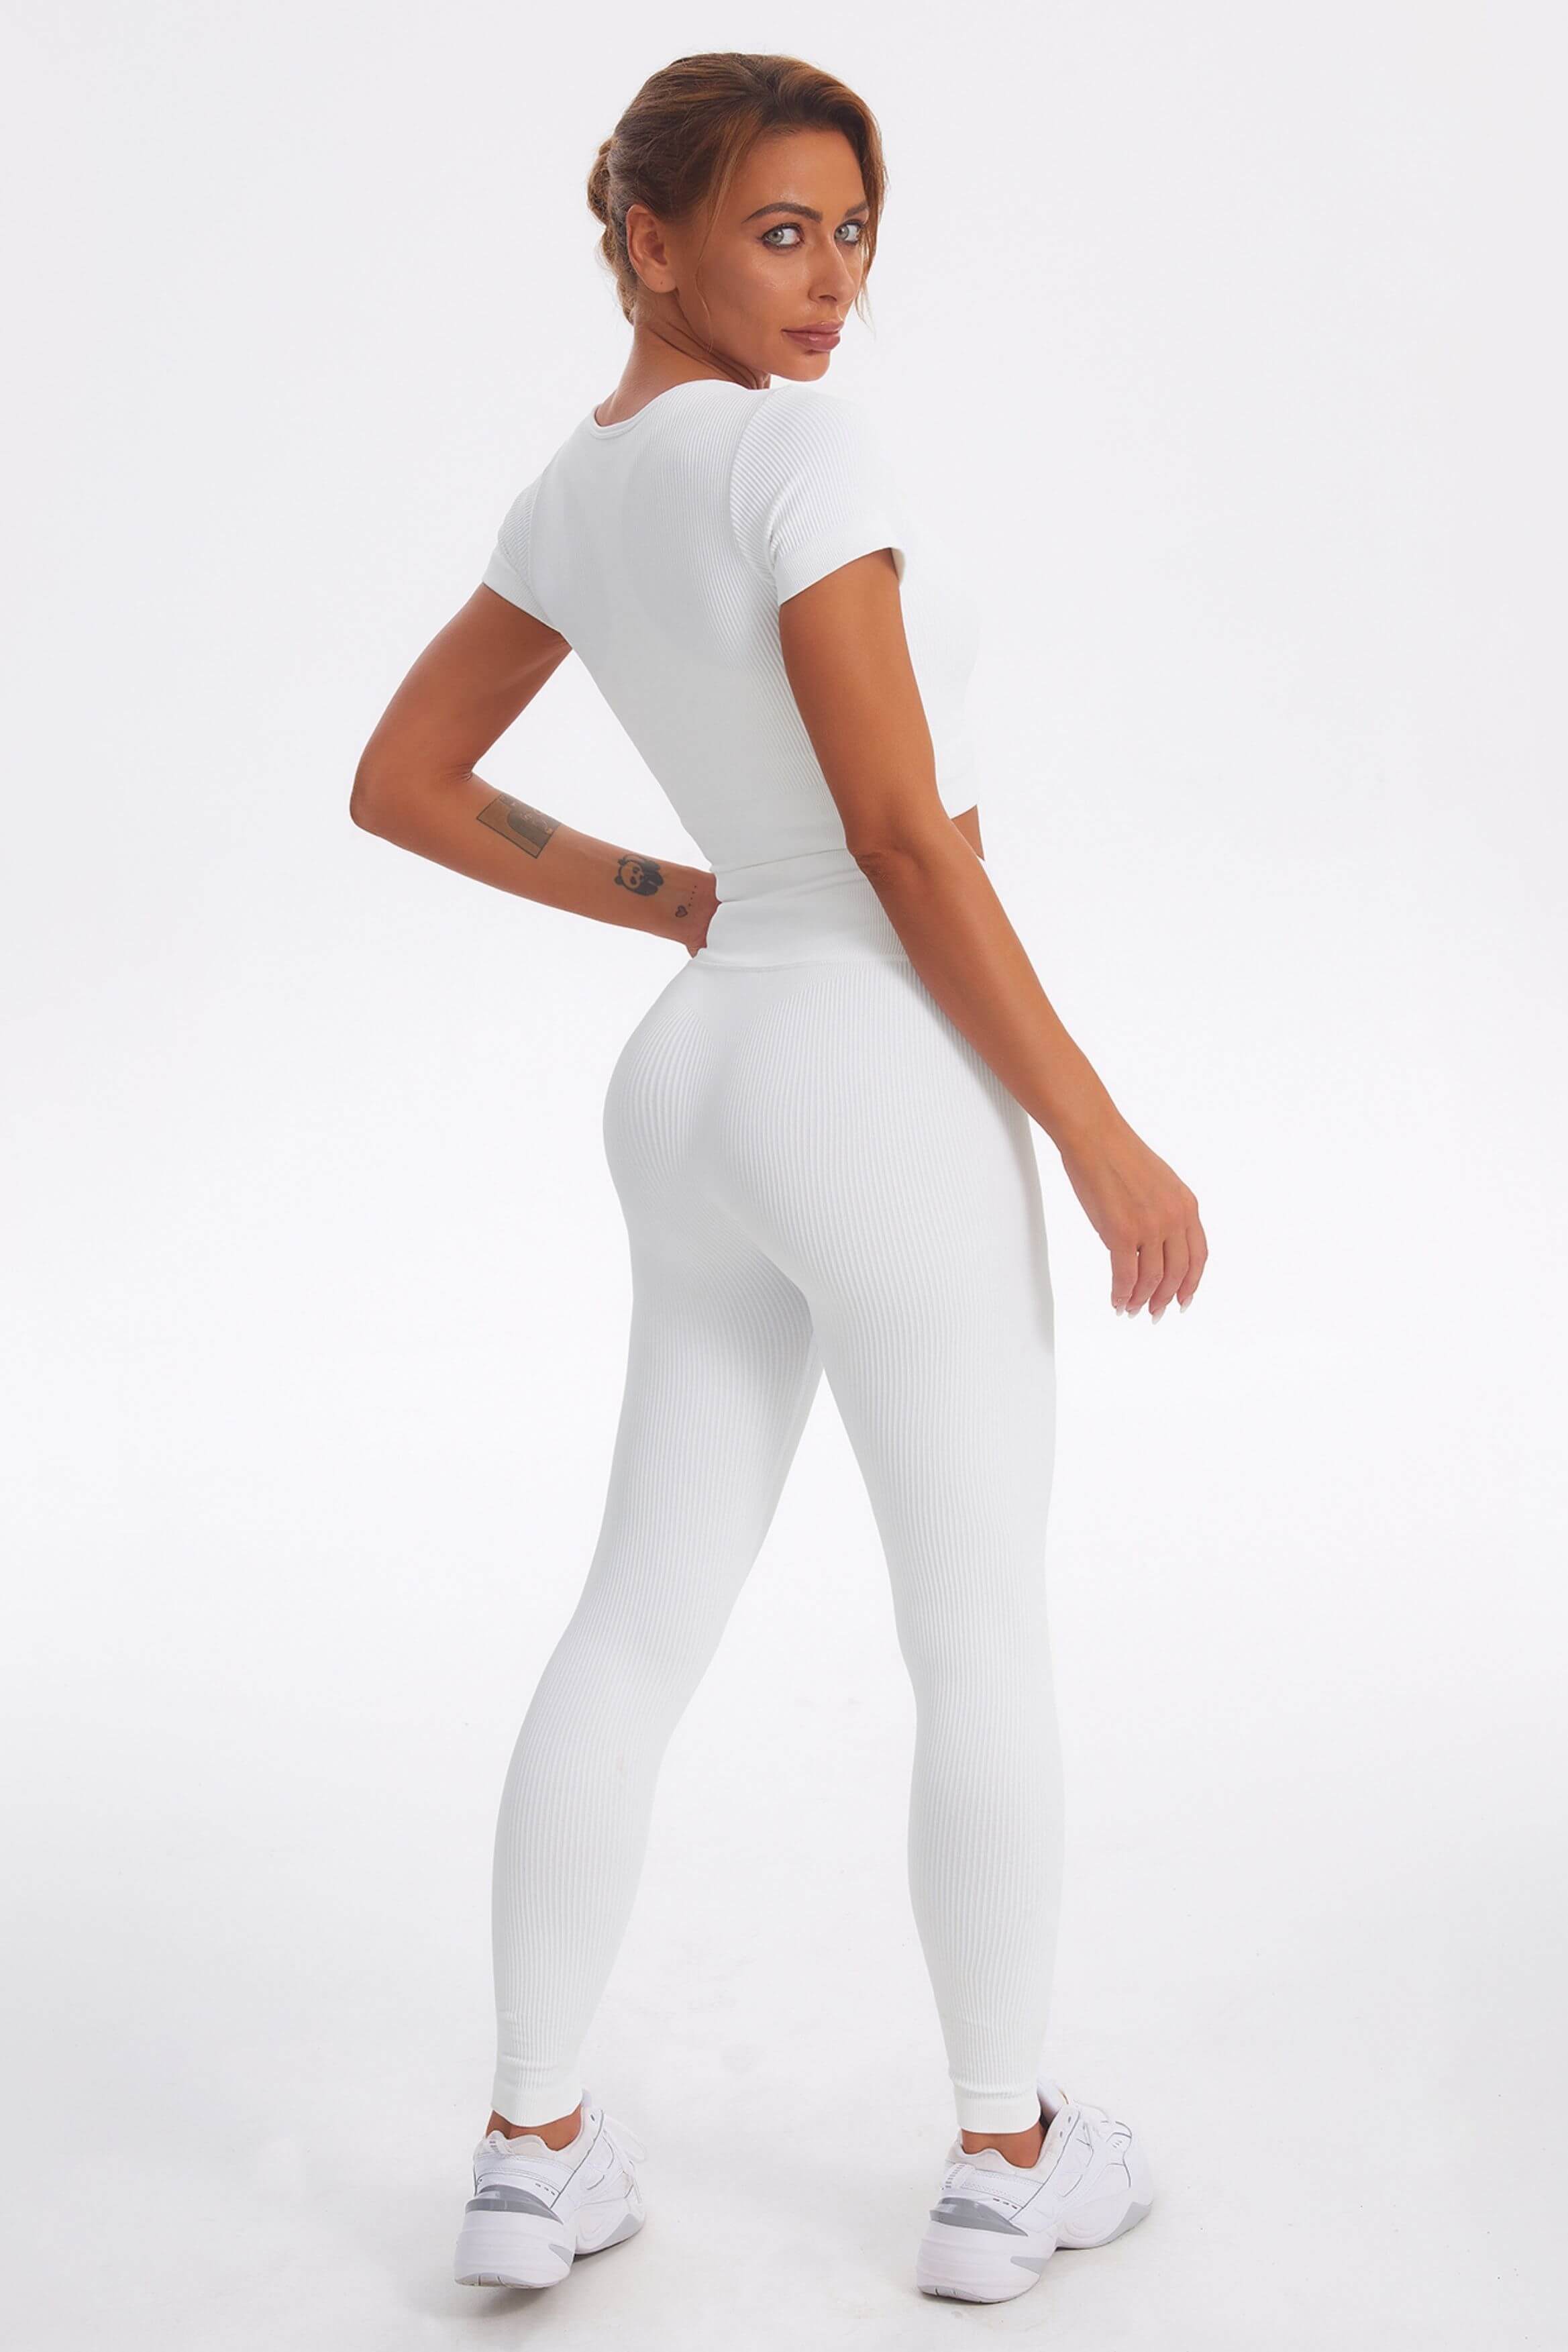 Workout Outfits for Women Seamless Sexy Clothes 2 Piece Ribbed